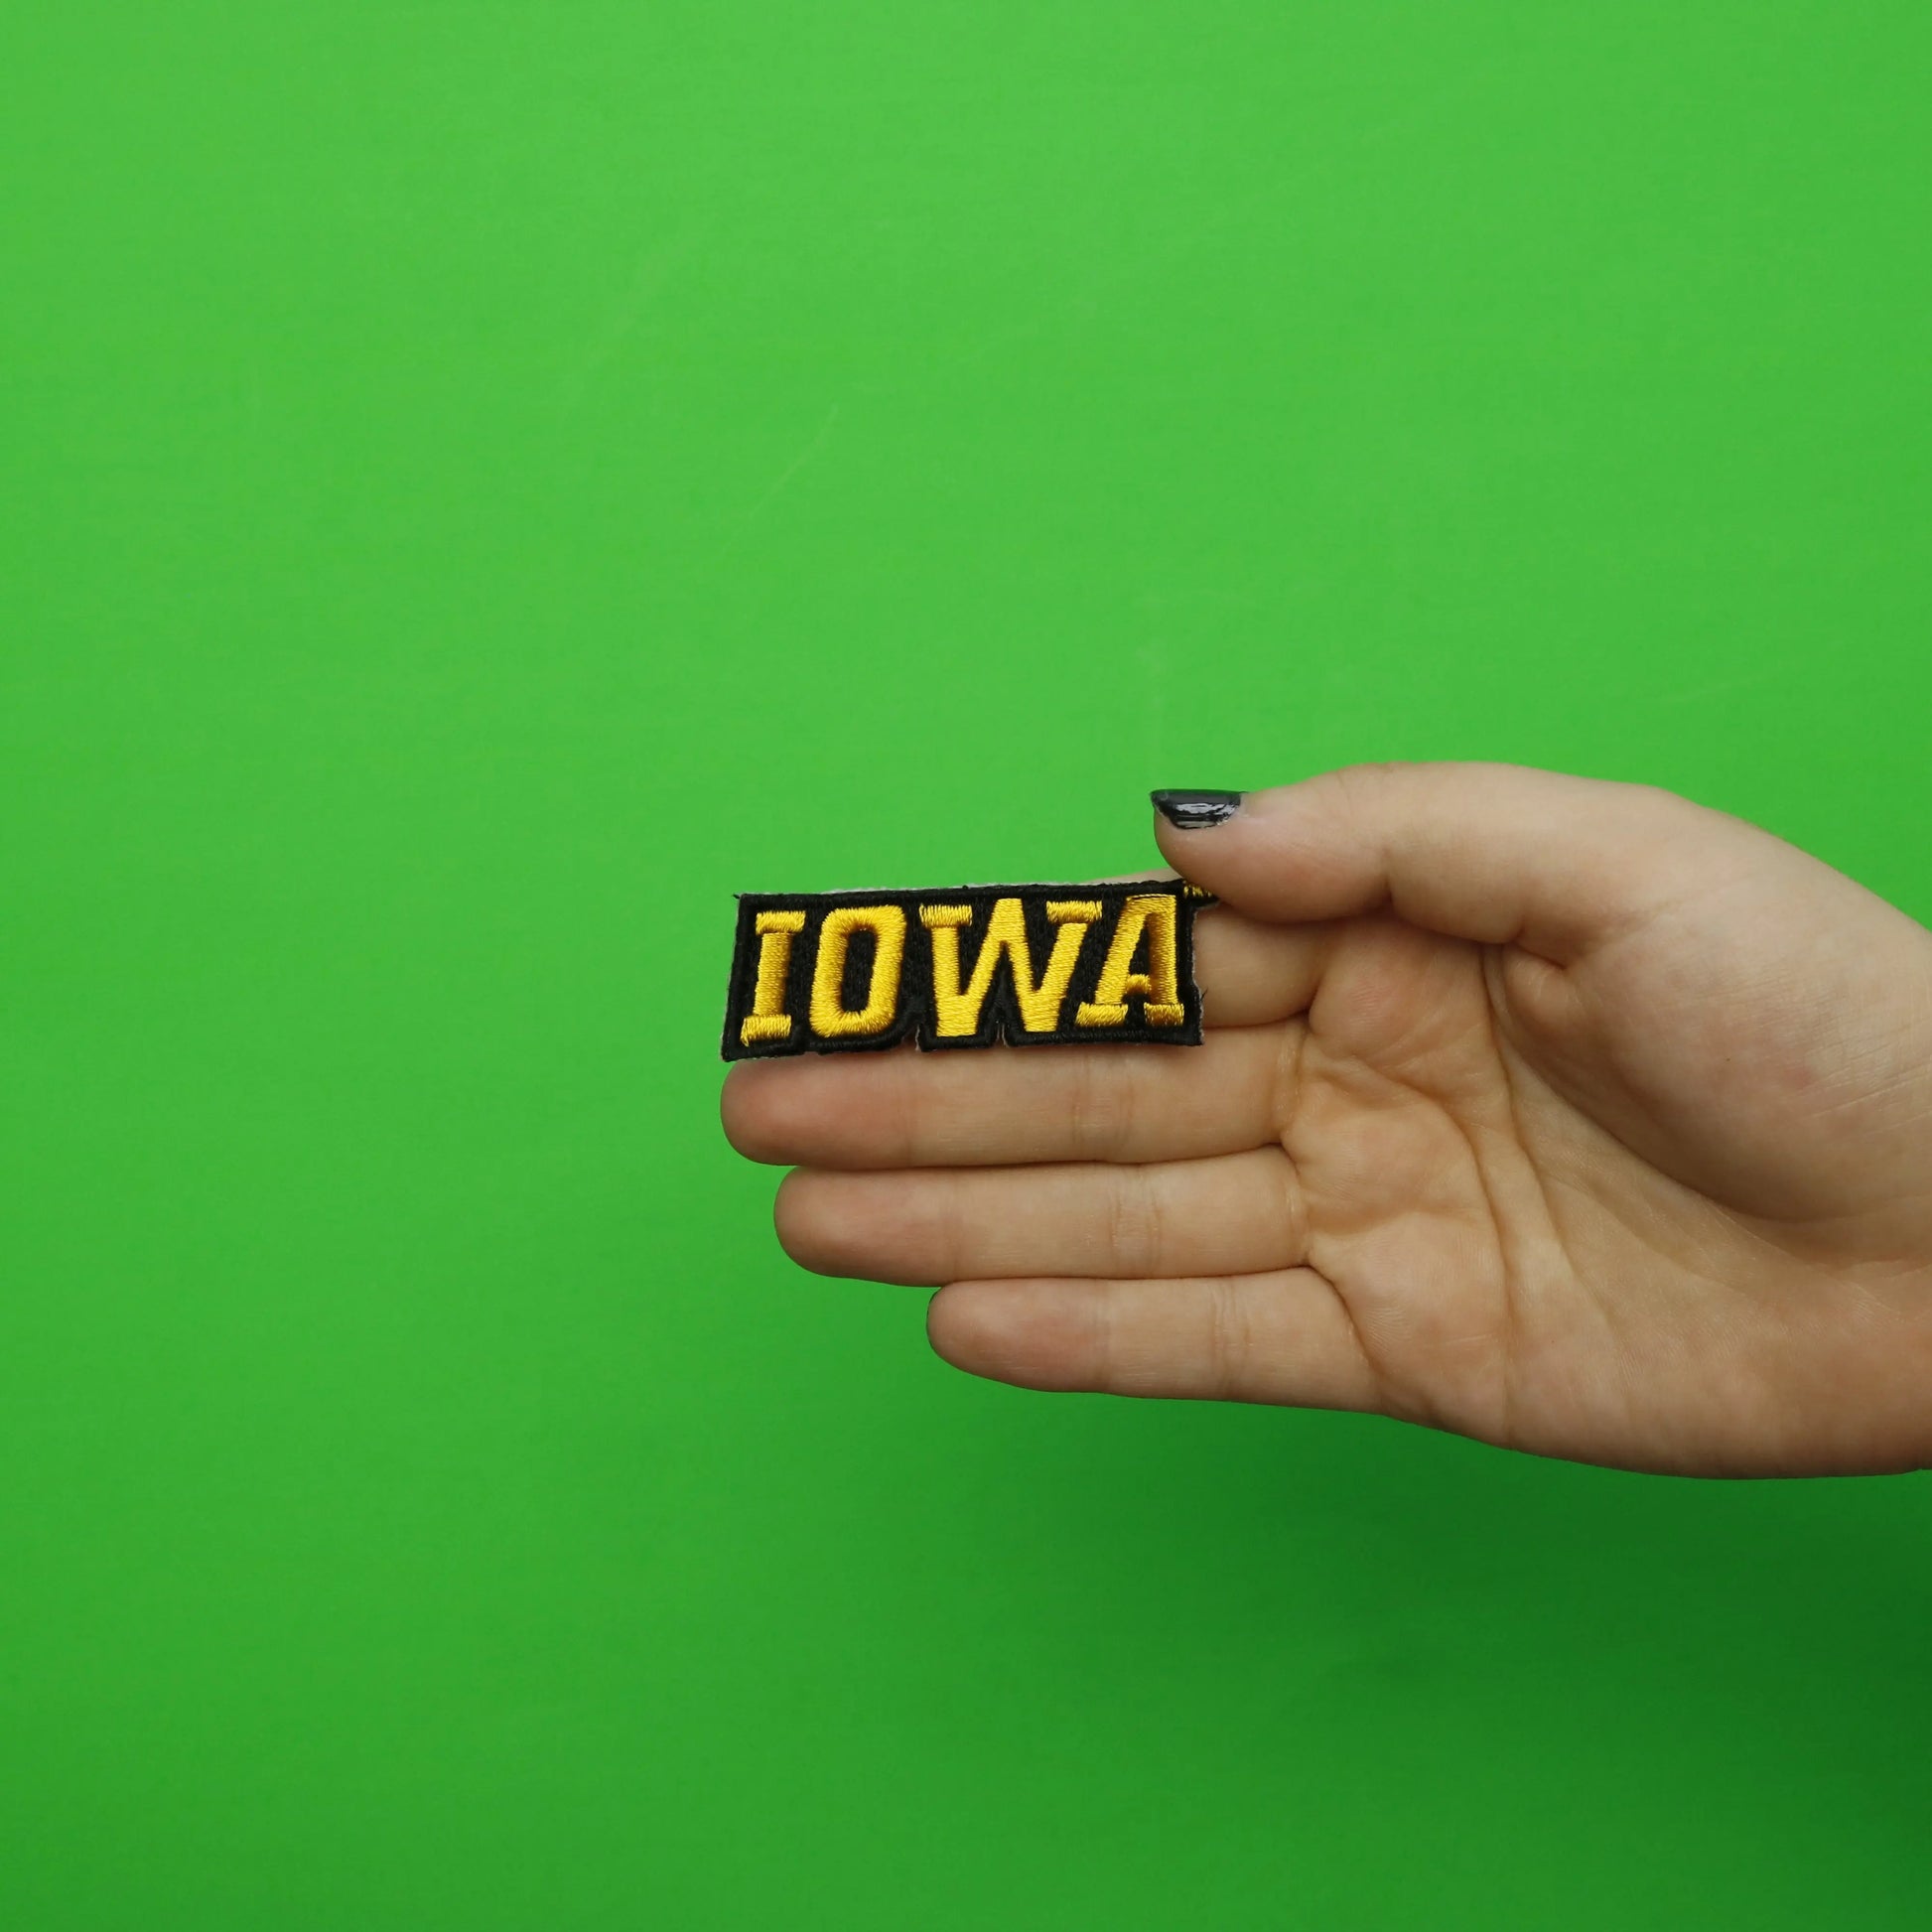 Iowa Hawkeyes Script Iron On Embroidered Patch 